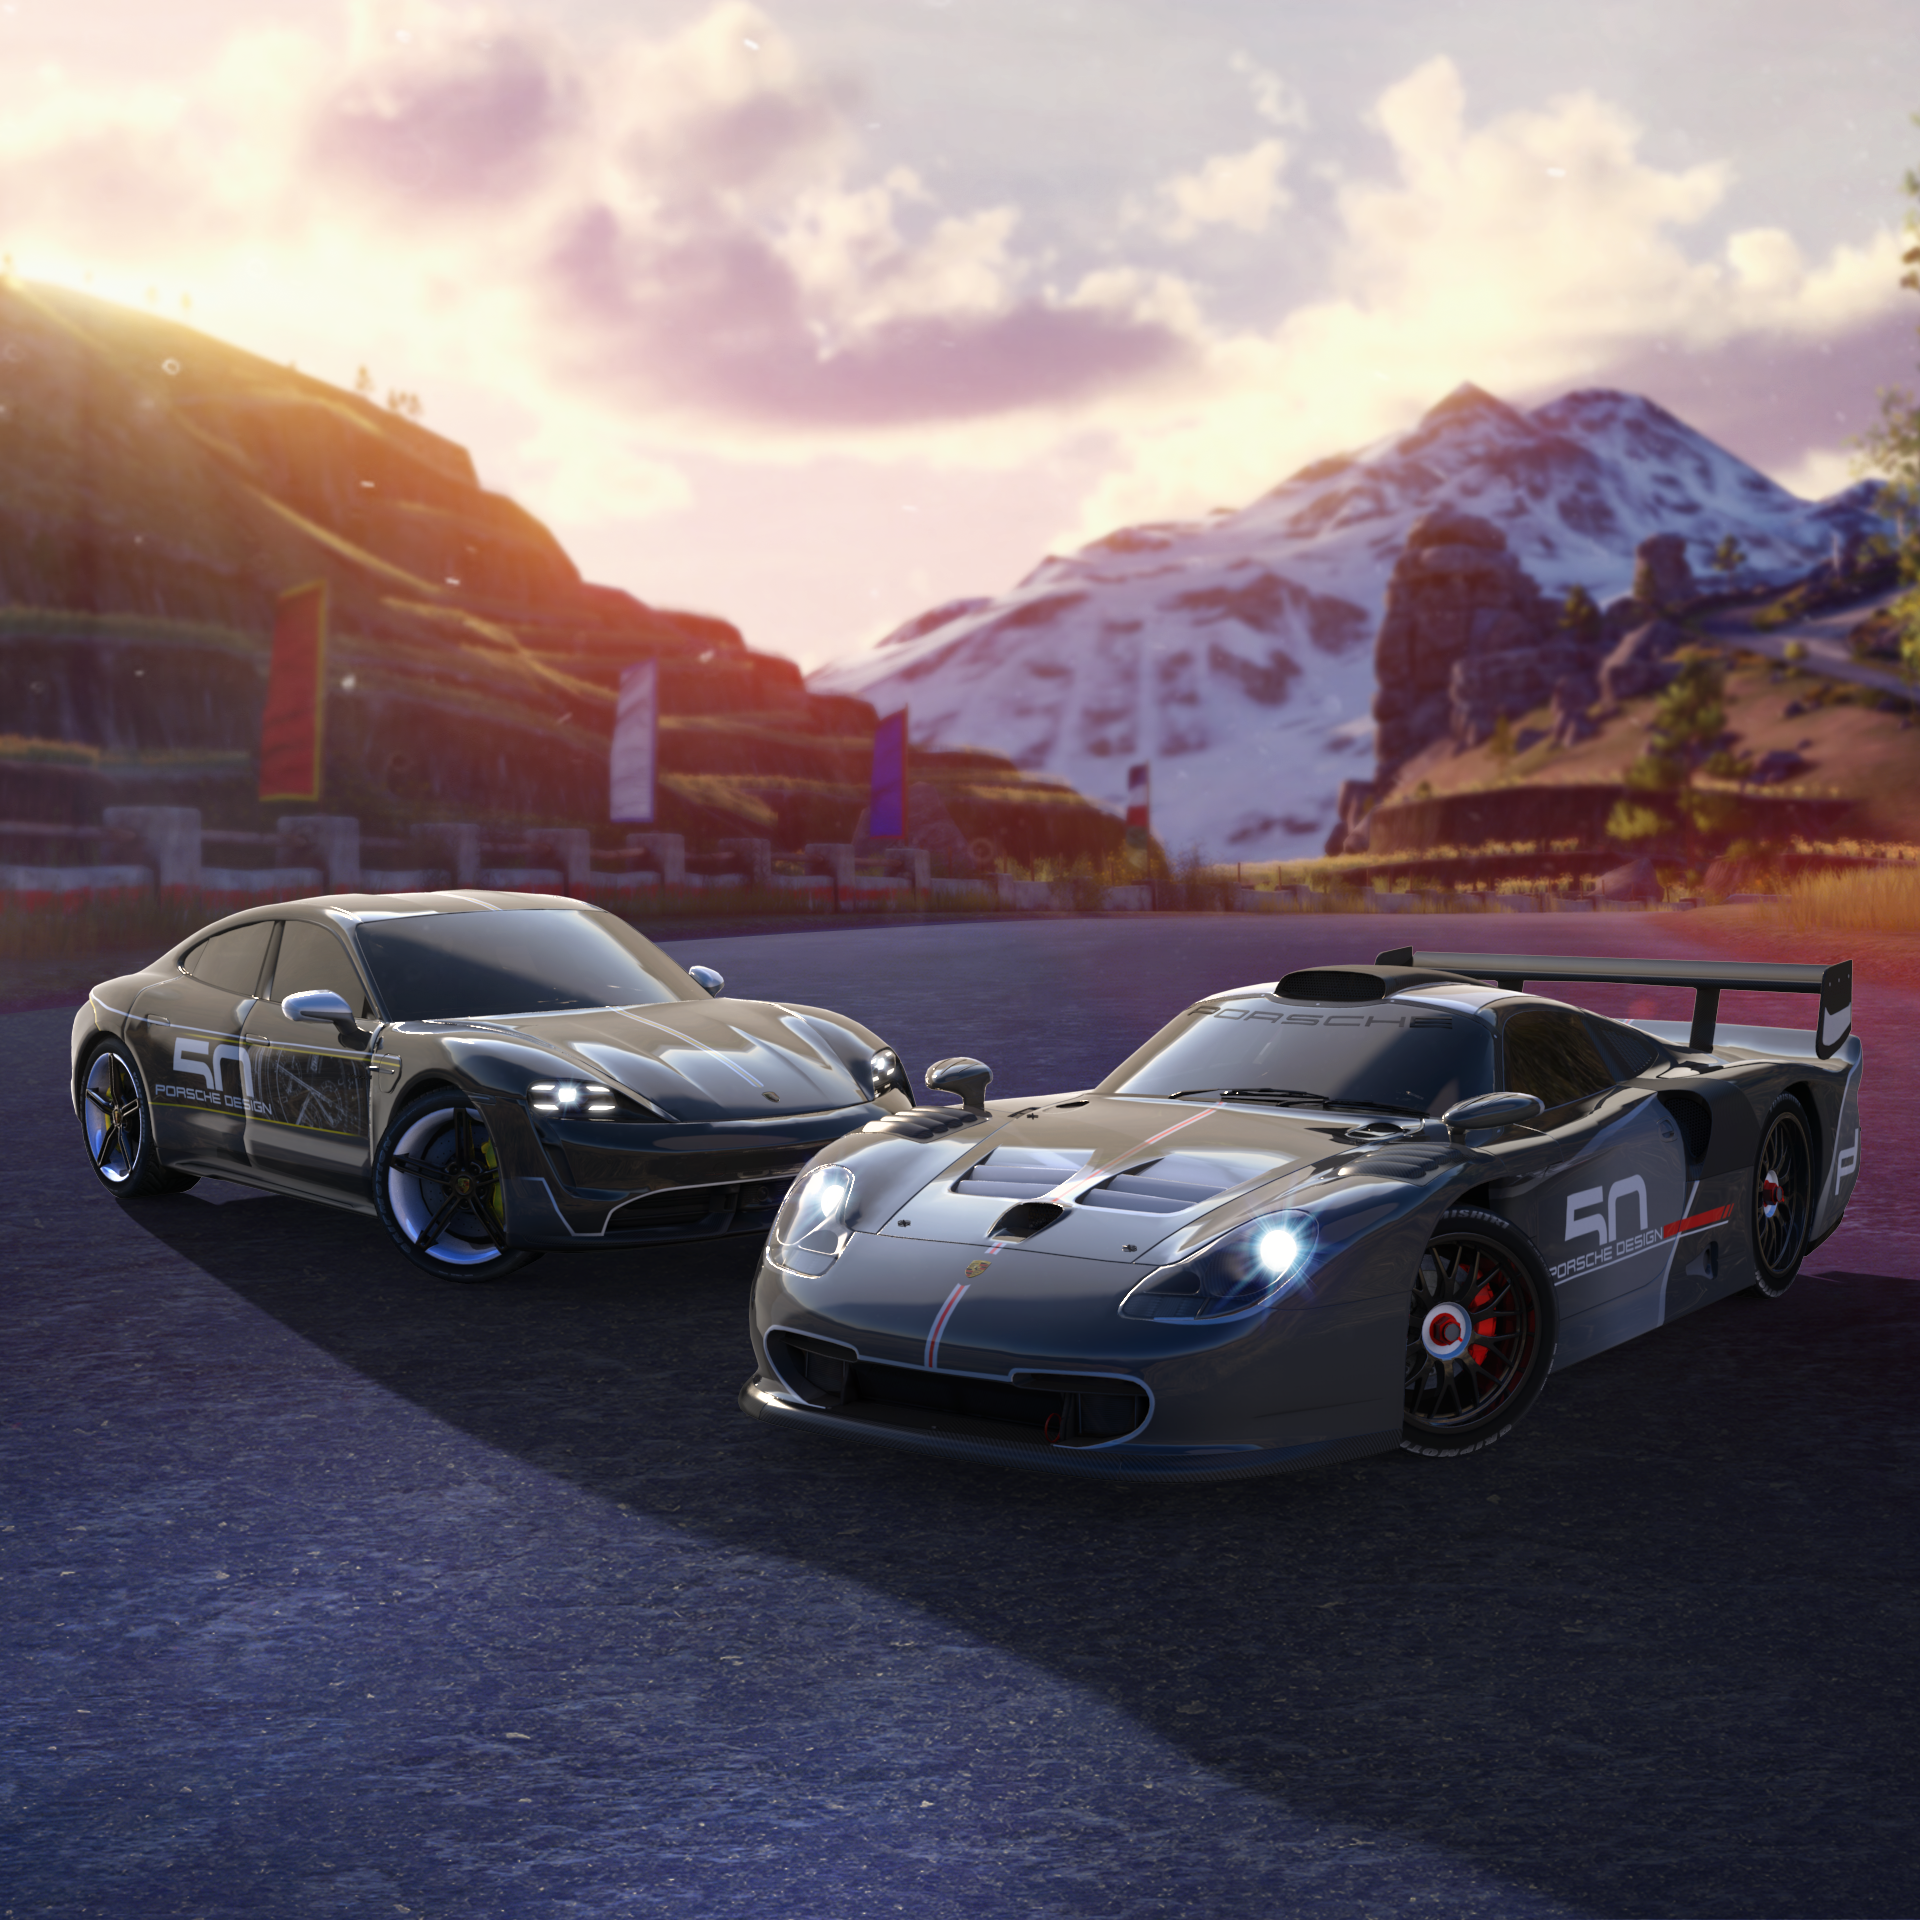 “Porsche Design 50th anniversary” event offers racing action and exclusive prizes for gamers